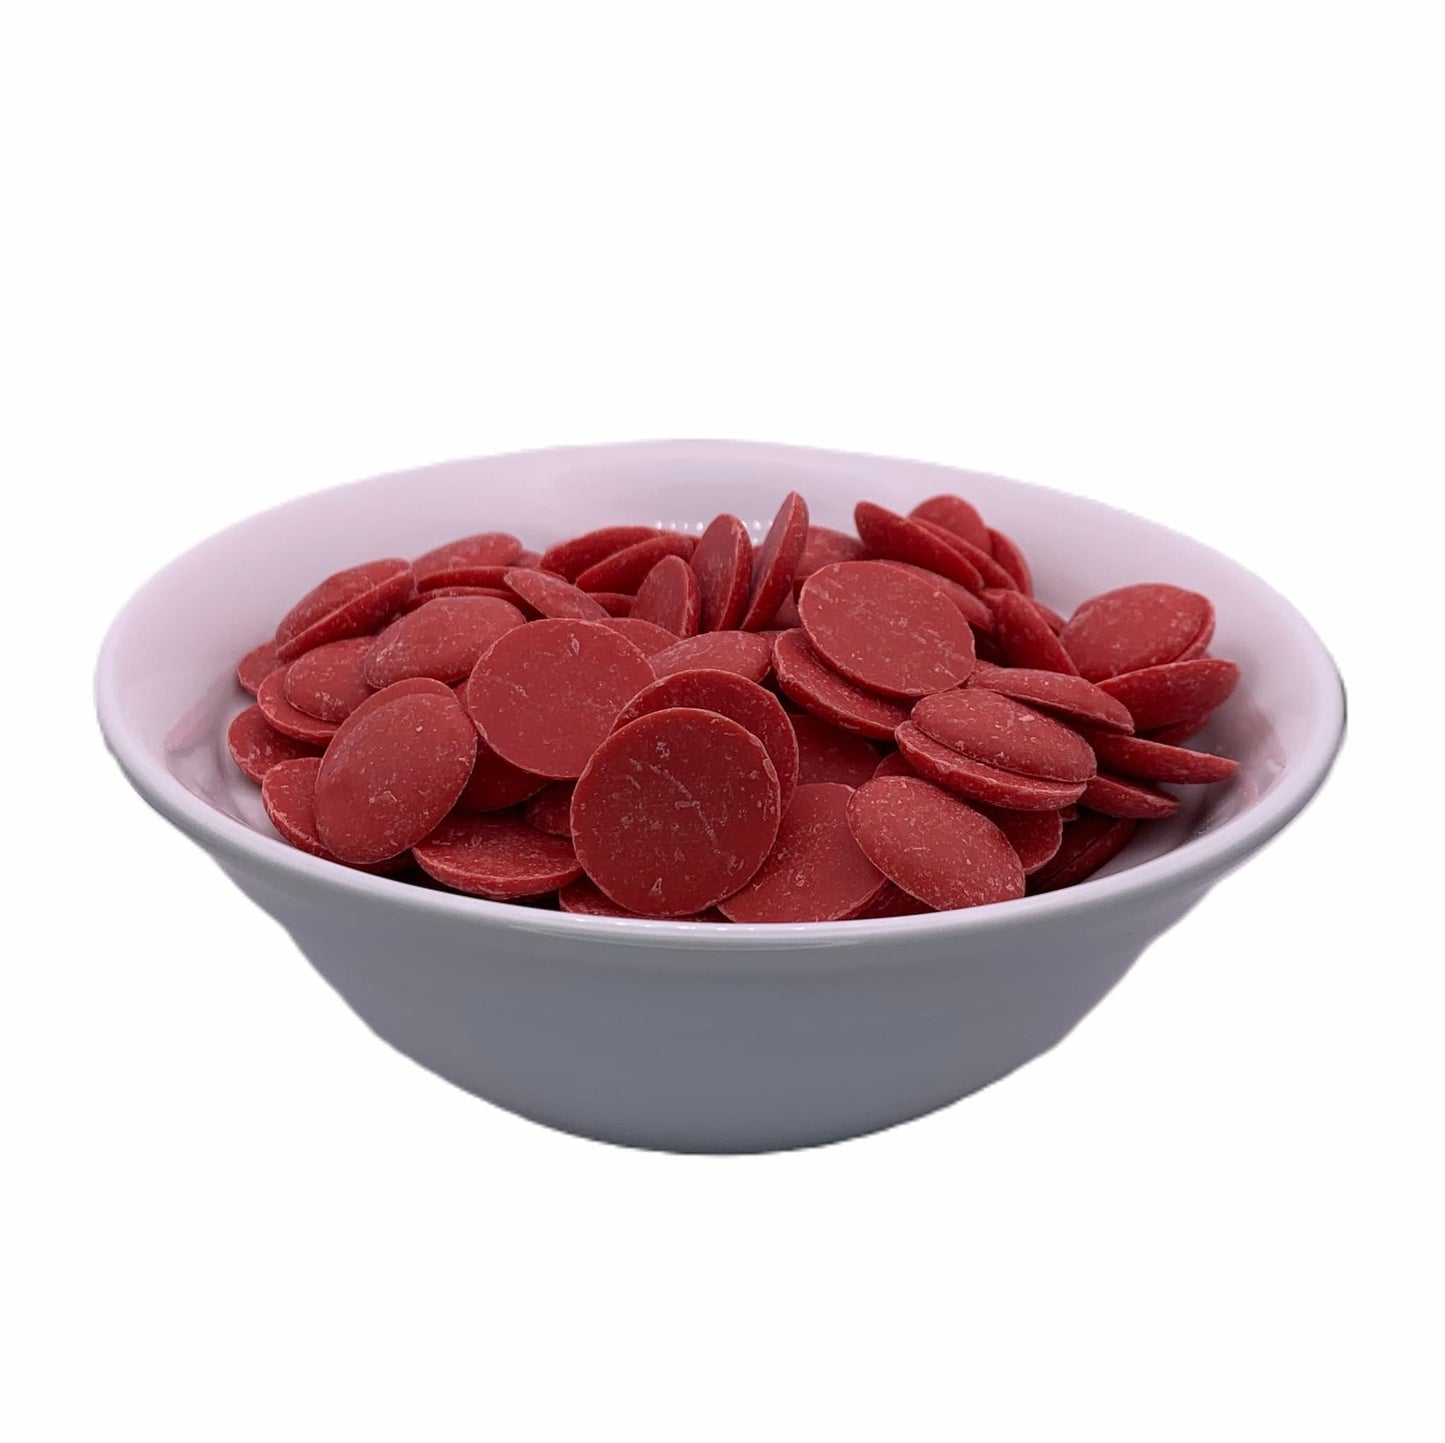 Red chocolate melting wafers by Merckens, captured from a front perspective in a white bowl, ideal for themed treats and holiday confections.